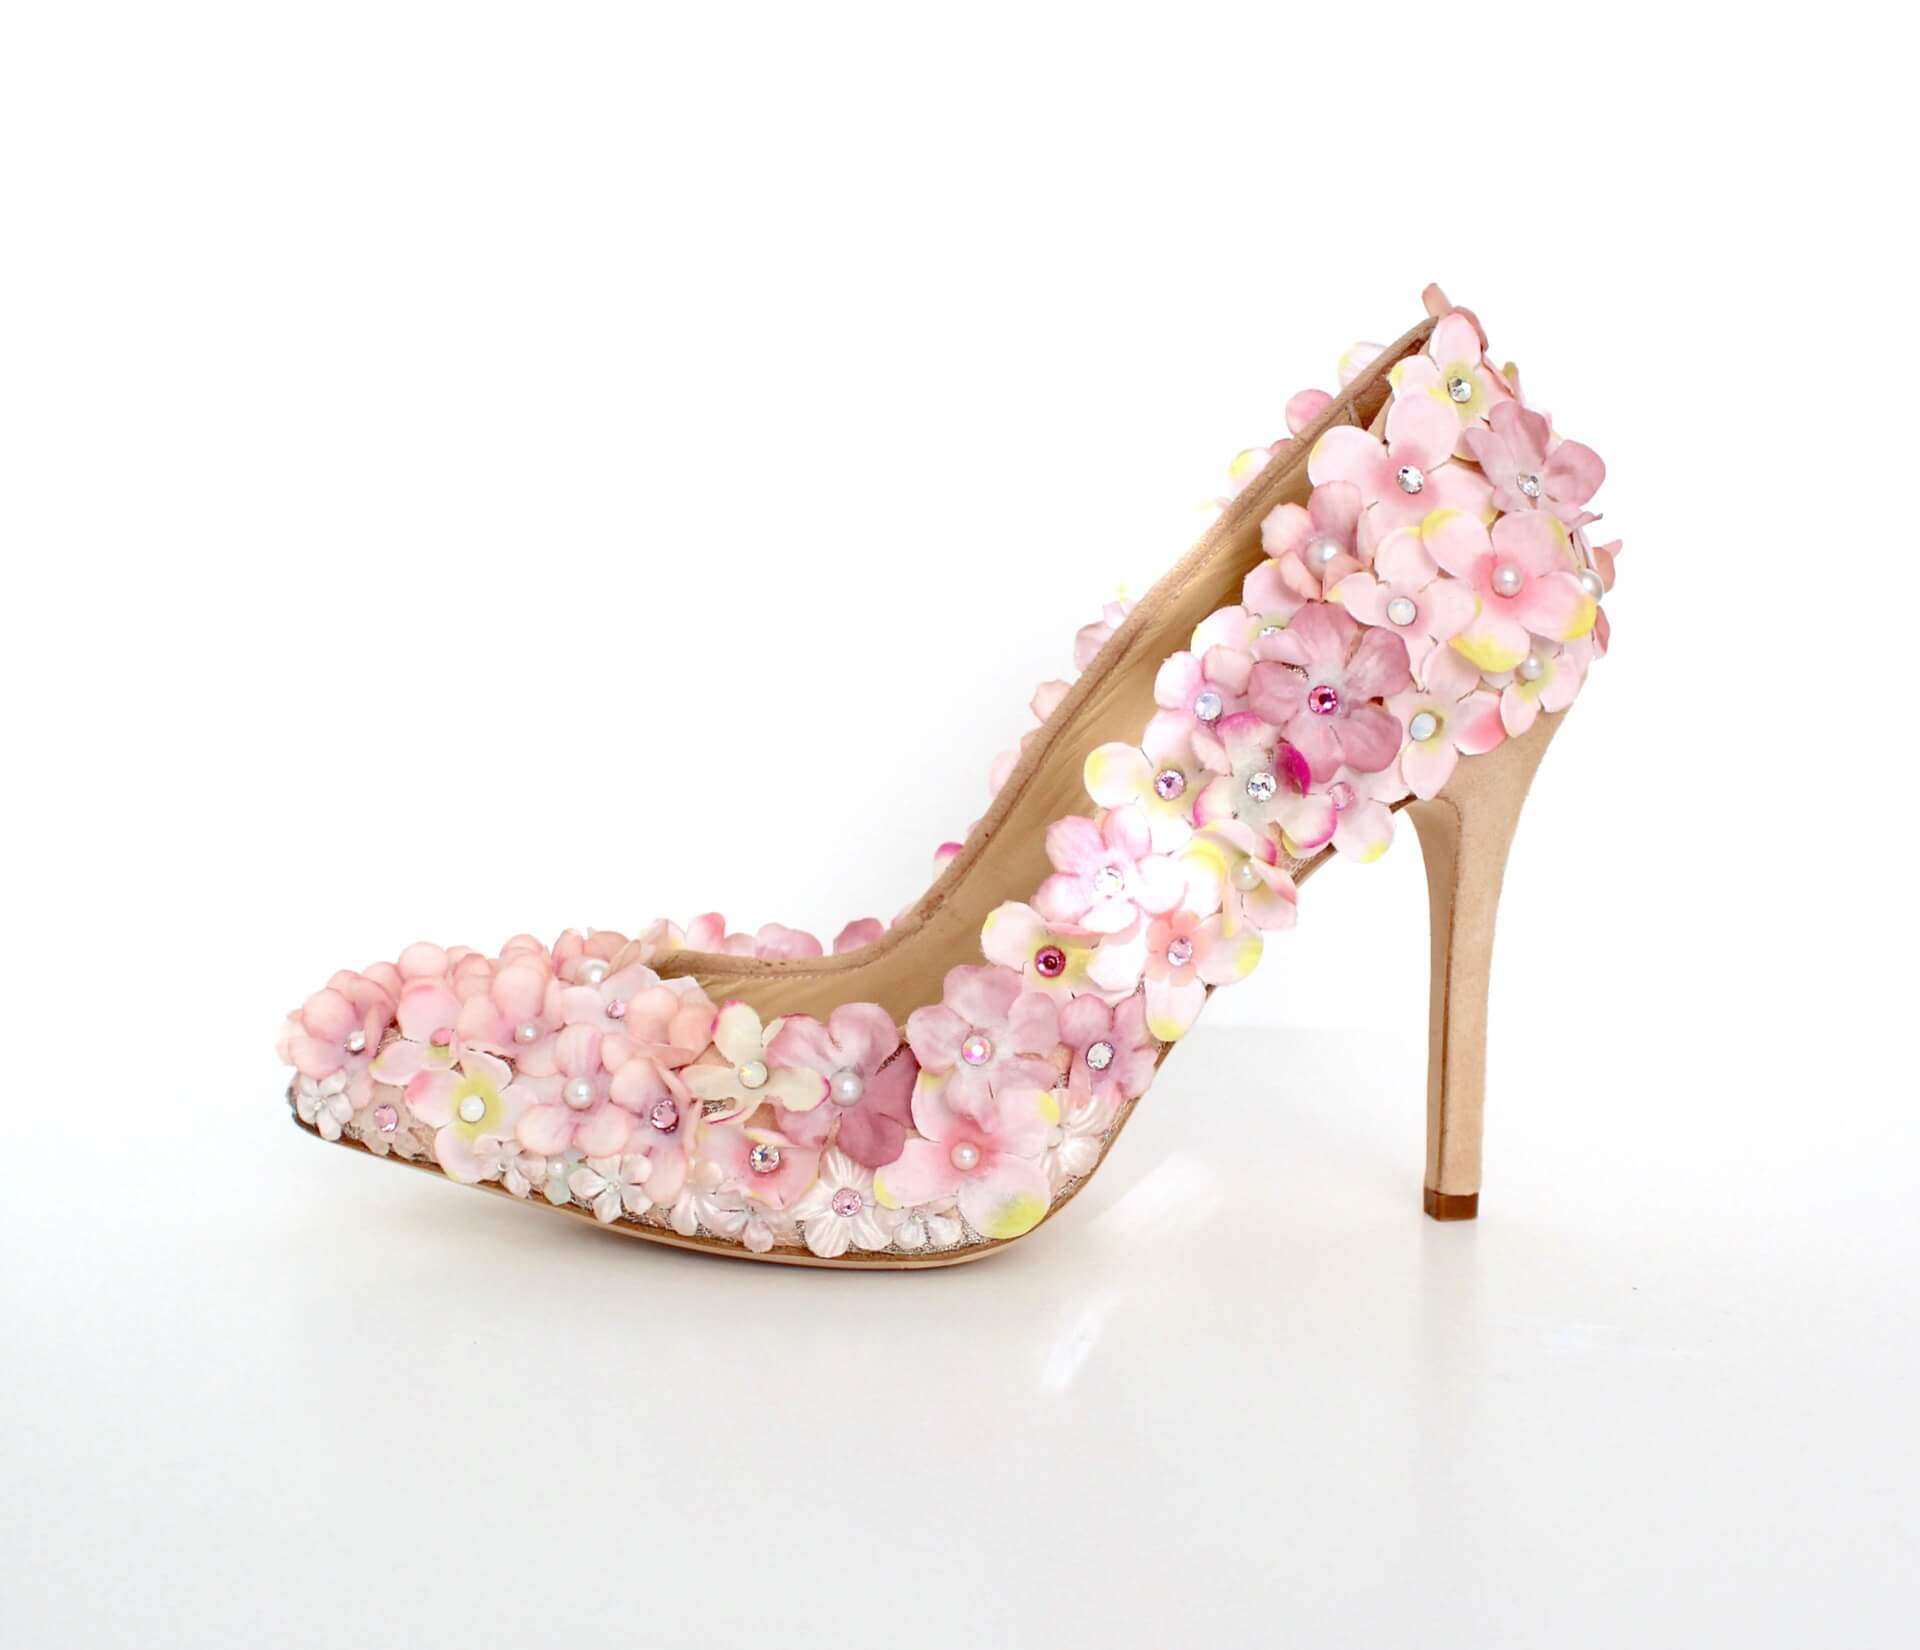 100 Pretty Wedding Shoes from Pinterest | Embellished wedding shoes, Blush  pink wedding shoes, Wedding shoe